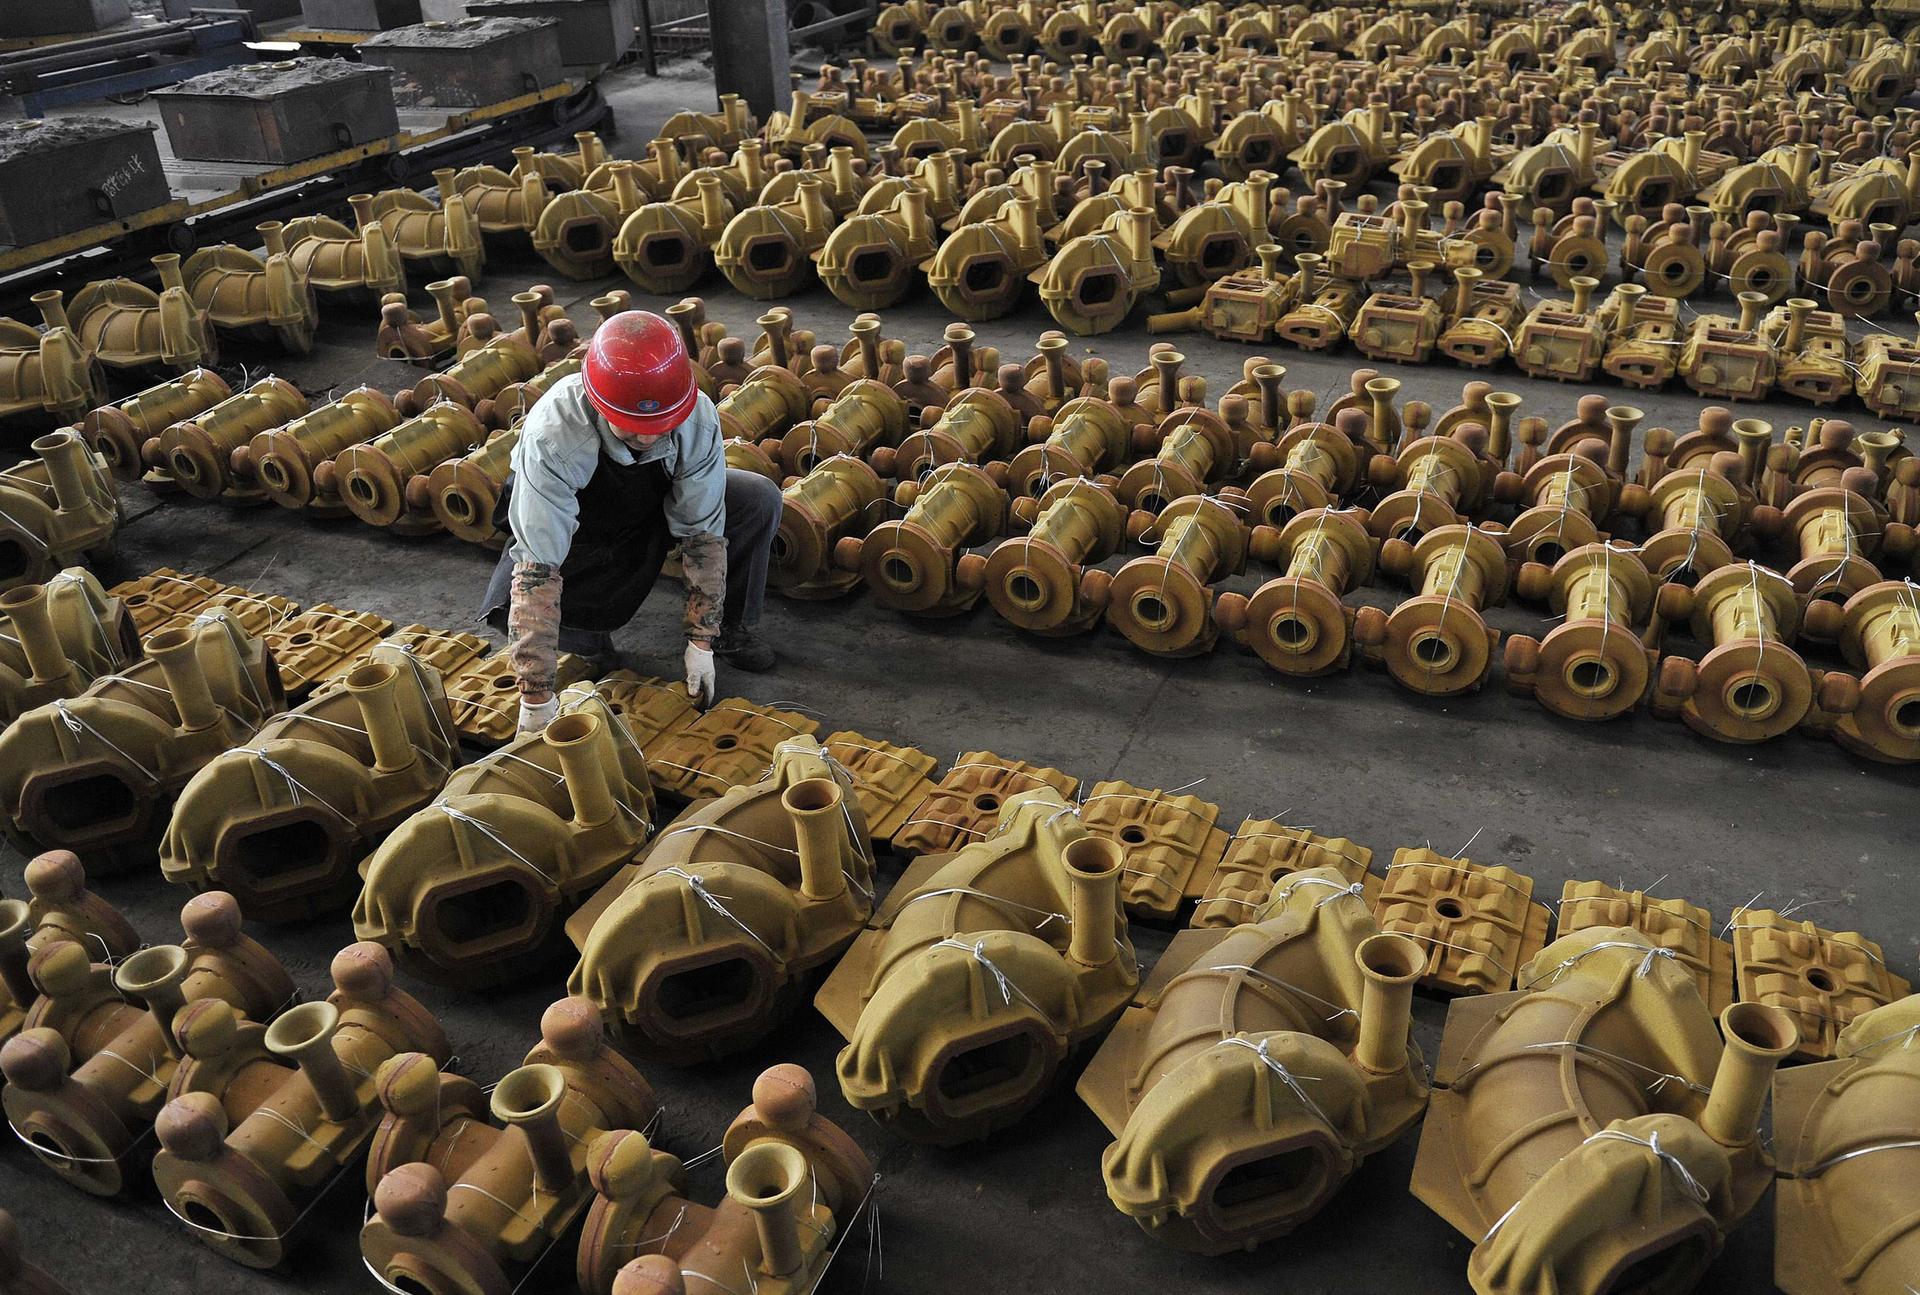 China can gain from continuing to make reforms that put more of the economy outside state control. Photo: Reuters